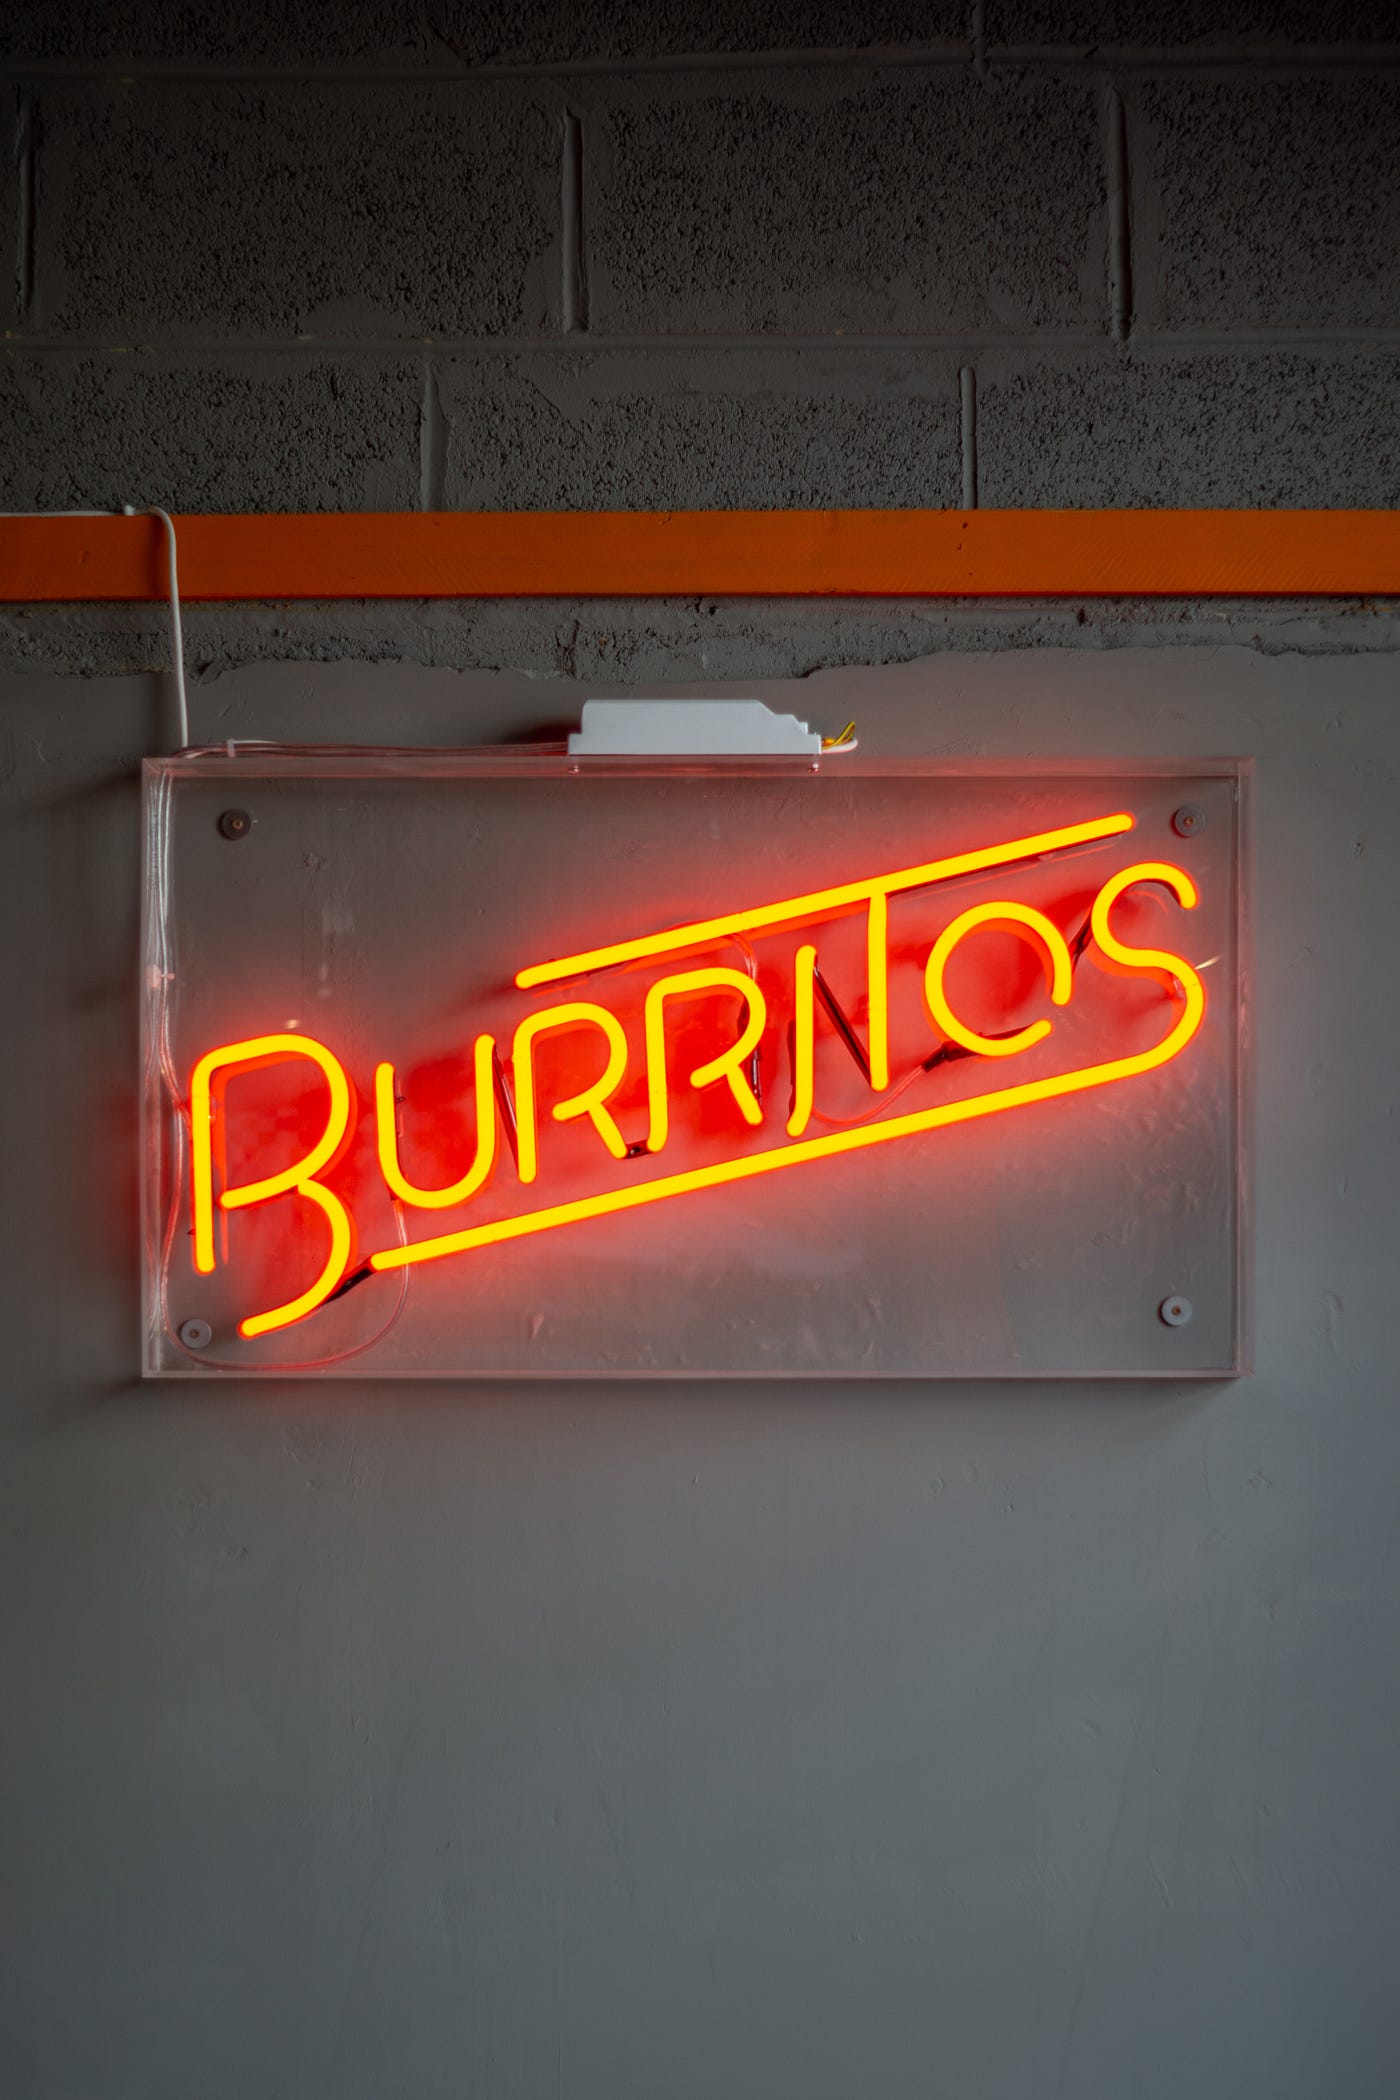 Red neon sign that reads “burritos” against a concrete wall.